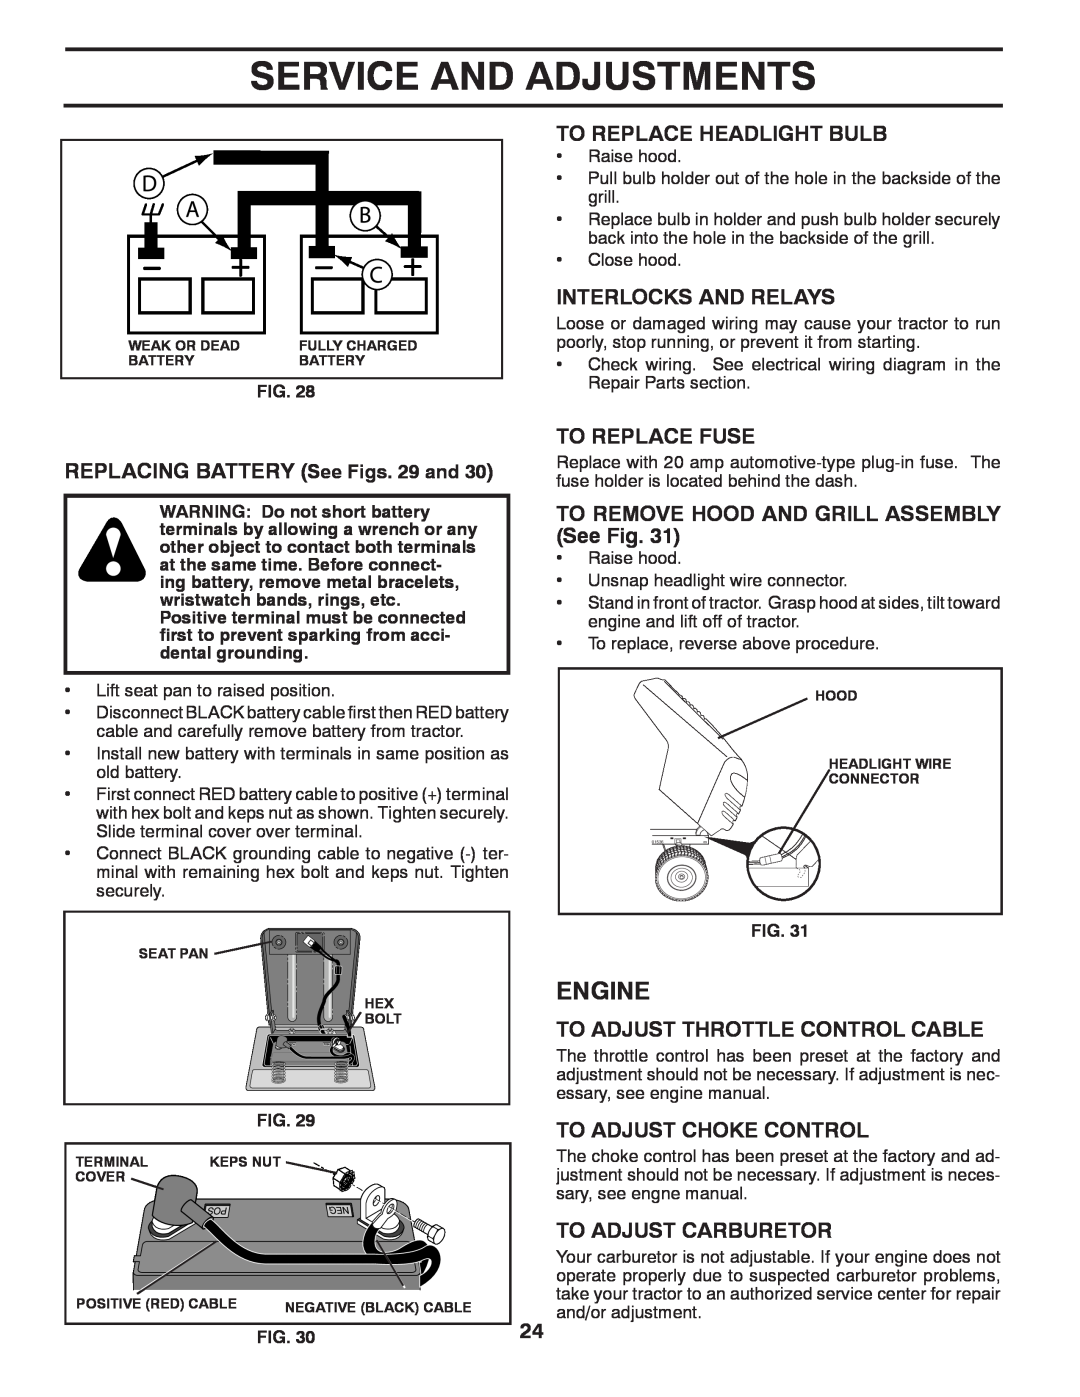 Poulan 413106 manual To Replace Headlight Bulb, Interlocks And Relays, REPLACING BATTERY See Figs. 29 and, To Replace Fuse 